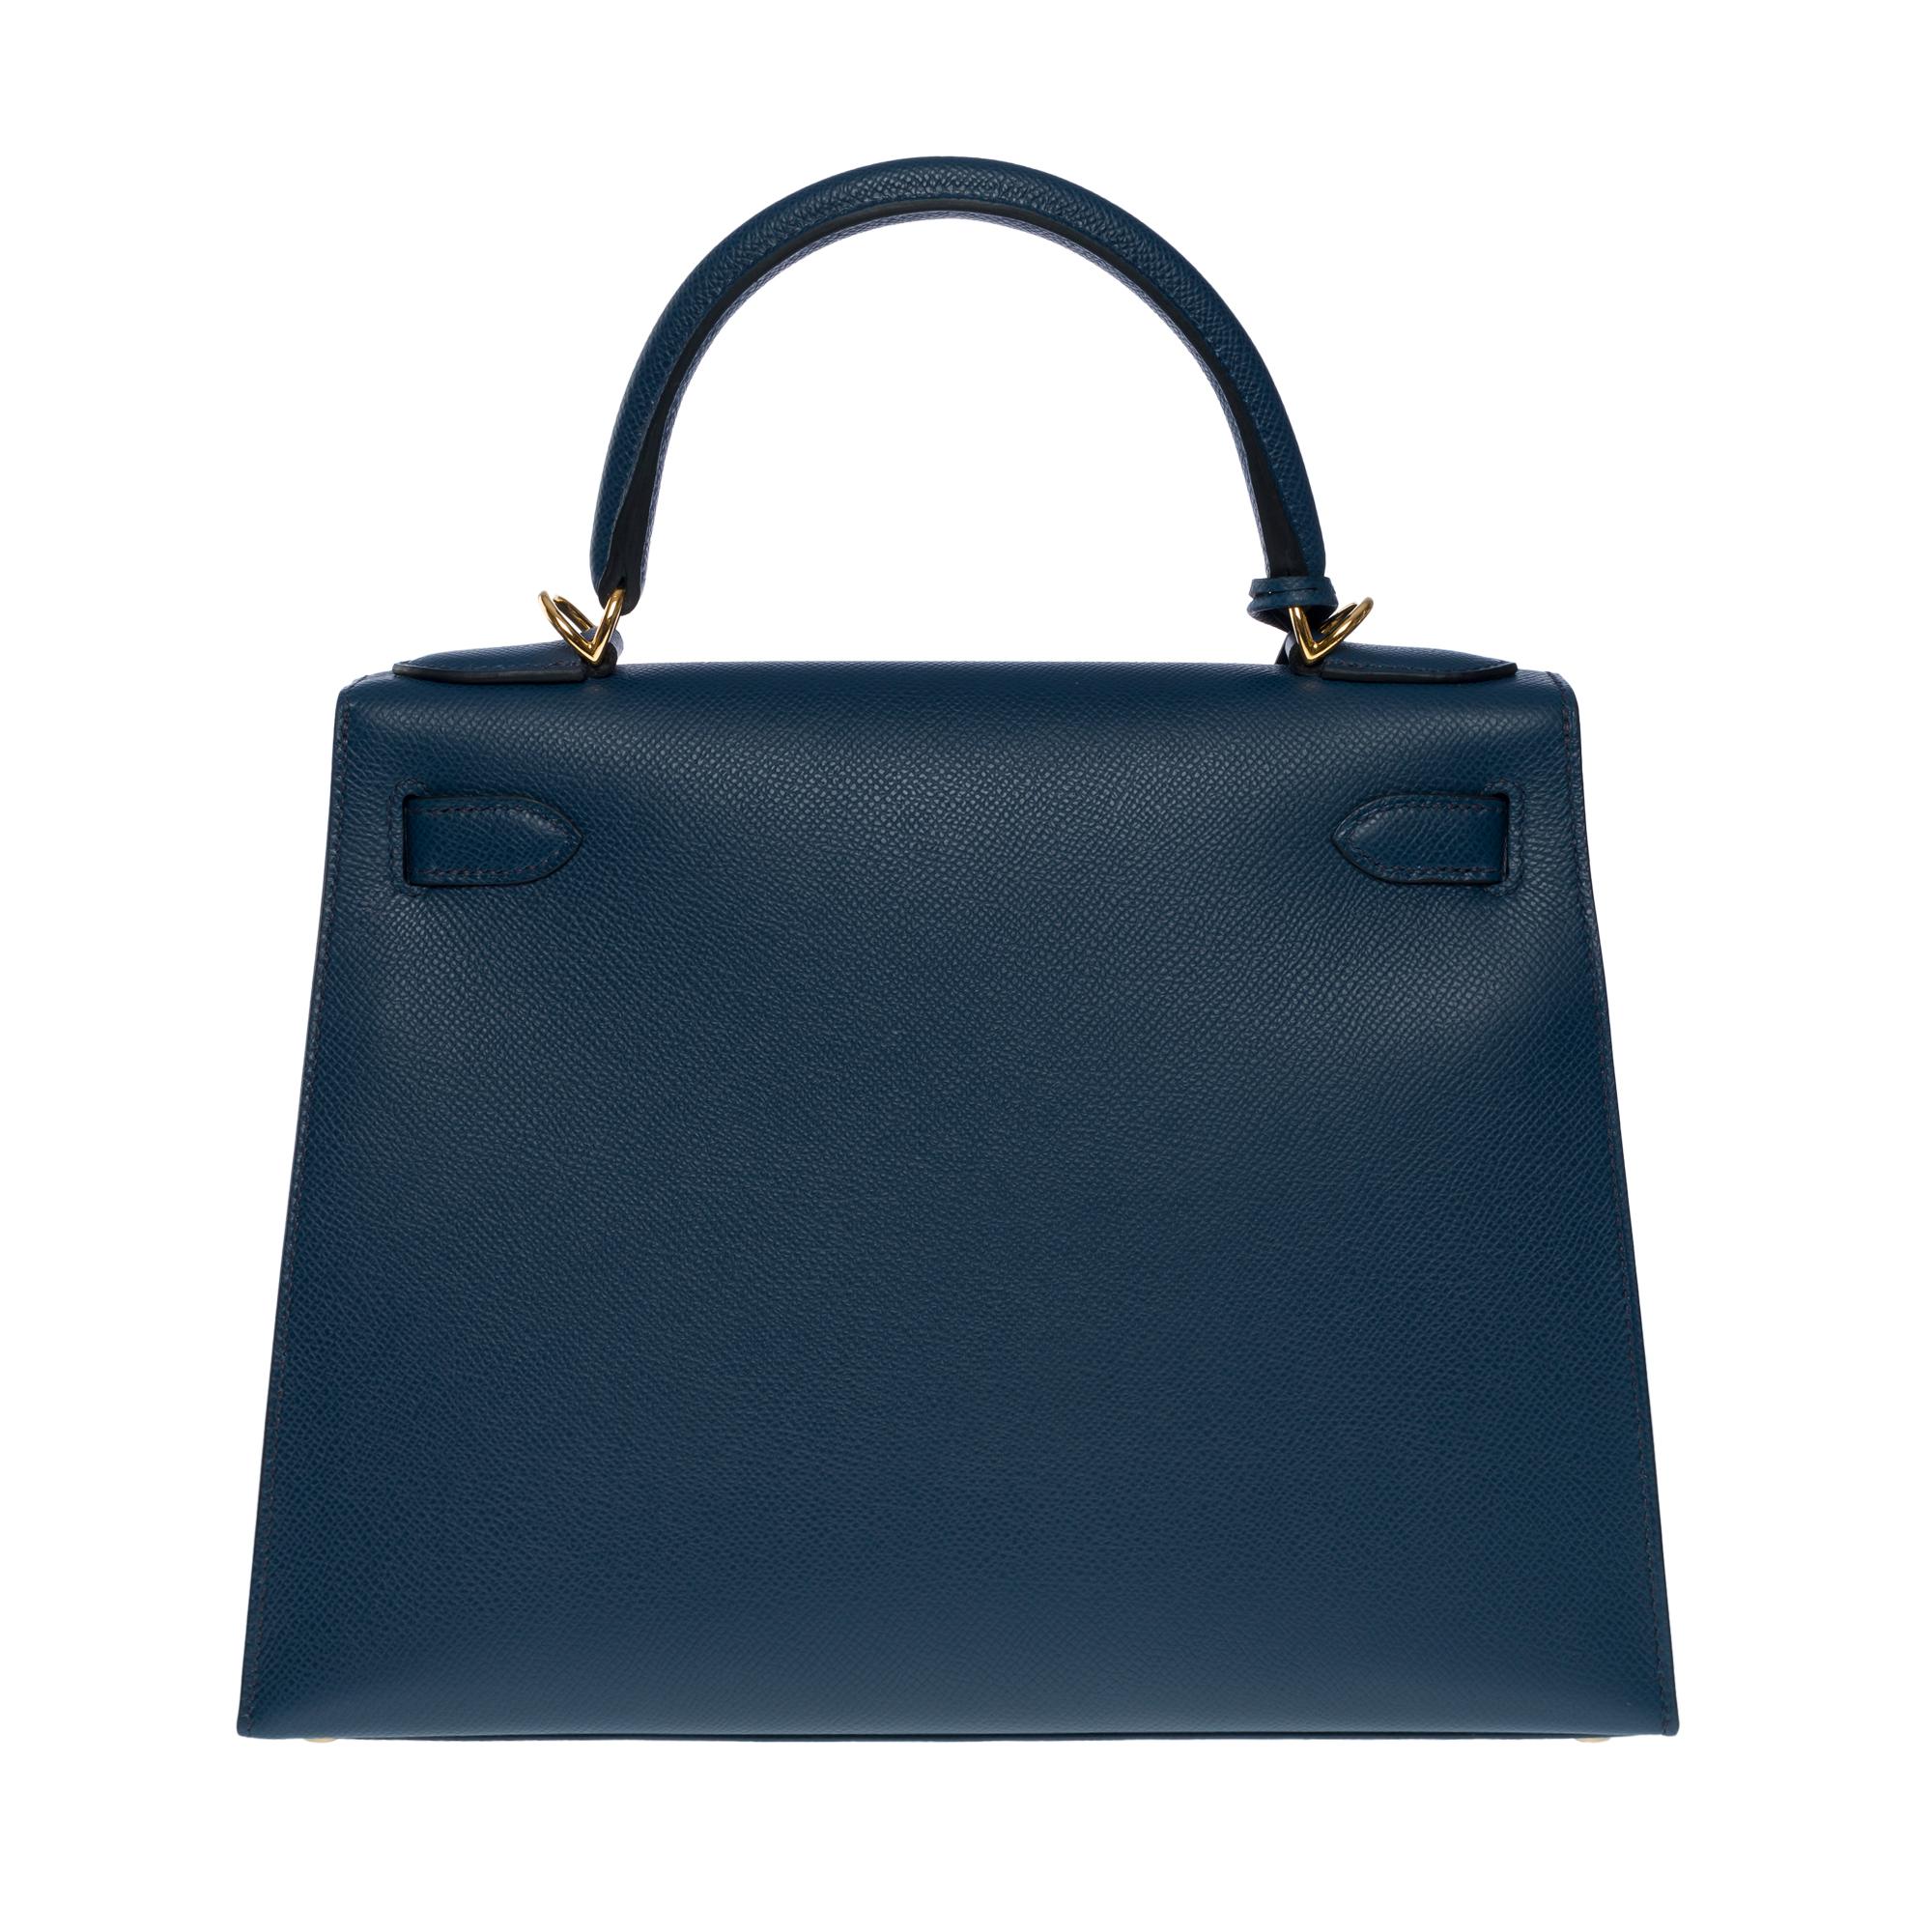 New Hermès Kelly 28 sellier handbag strap in Prussian blue Epsom leather, GHW In New Condition In Paris, IDF